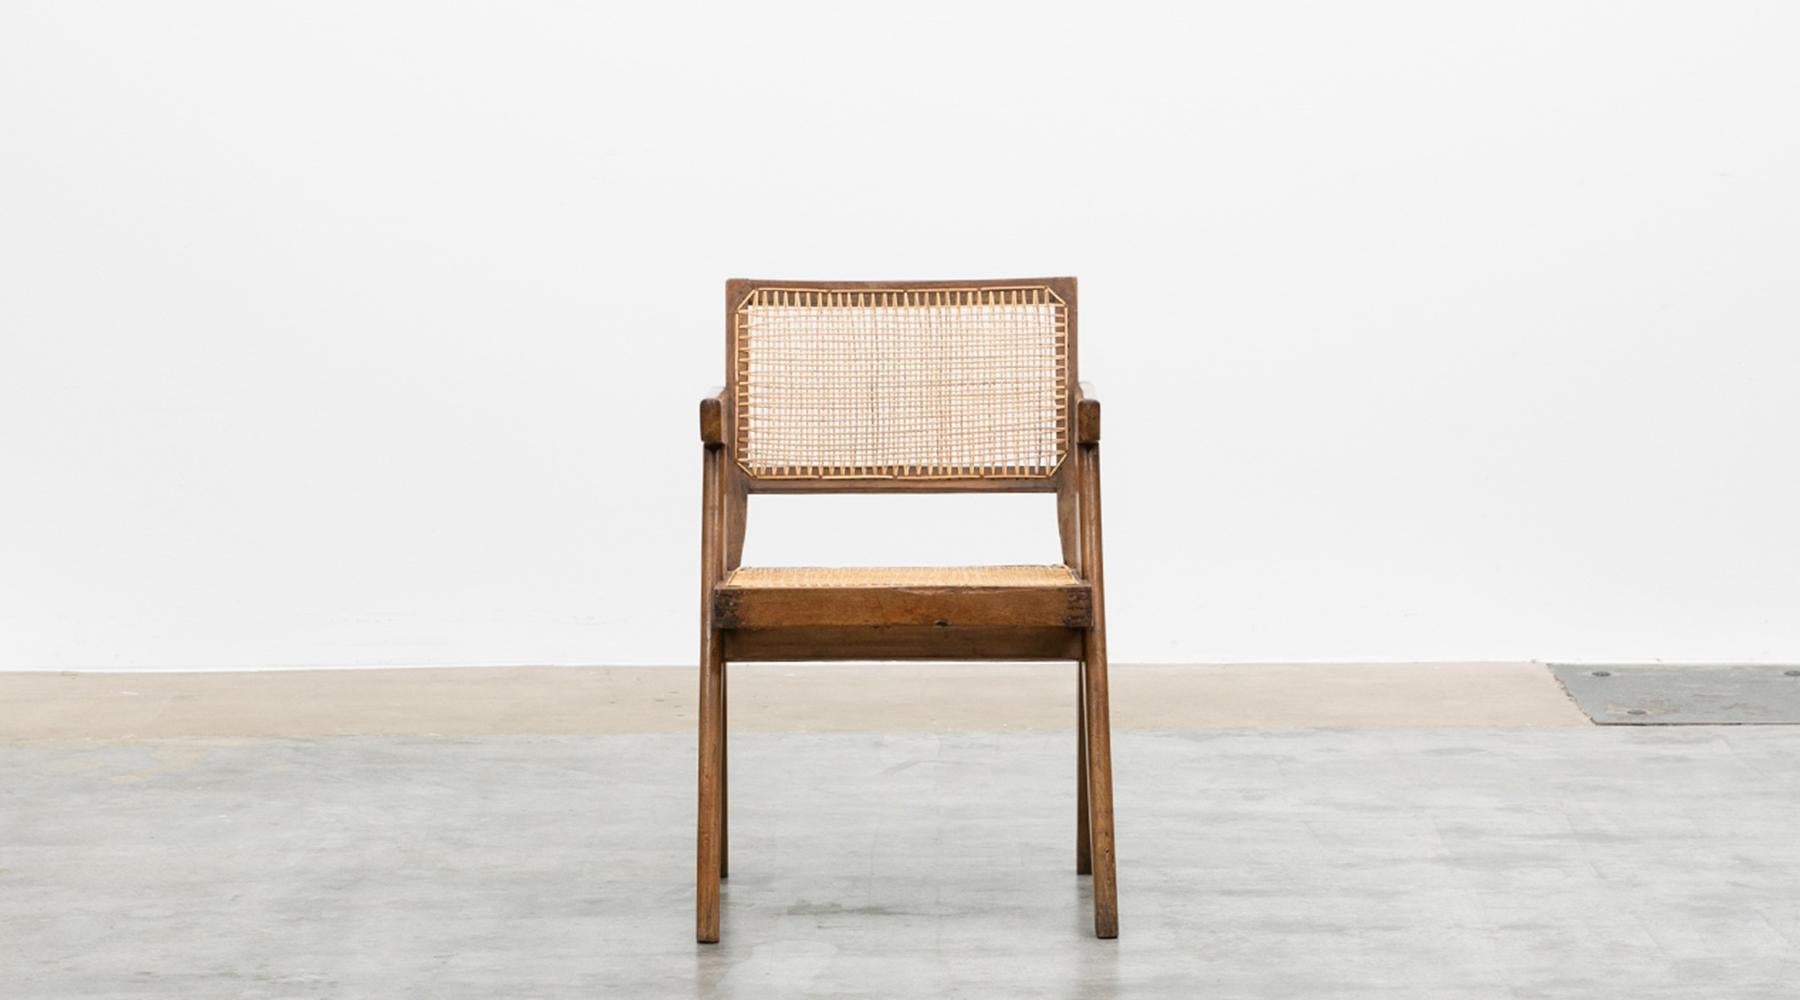 Rare chair by Pierre Jeanneret in teak and cane, Chandigarh, India, 1955.

Single original Chair designed by Pierre Jeanneret in teak with woven cane on the seat and curved backrest appears in beautiful patina. The chair is shorter than the lounge